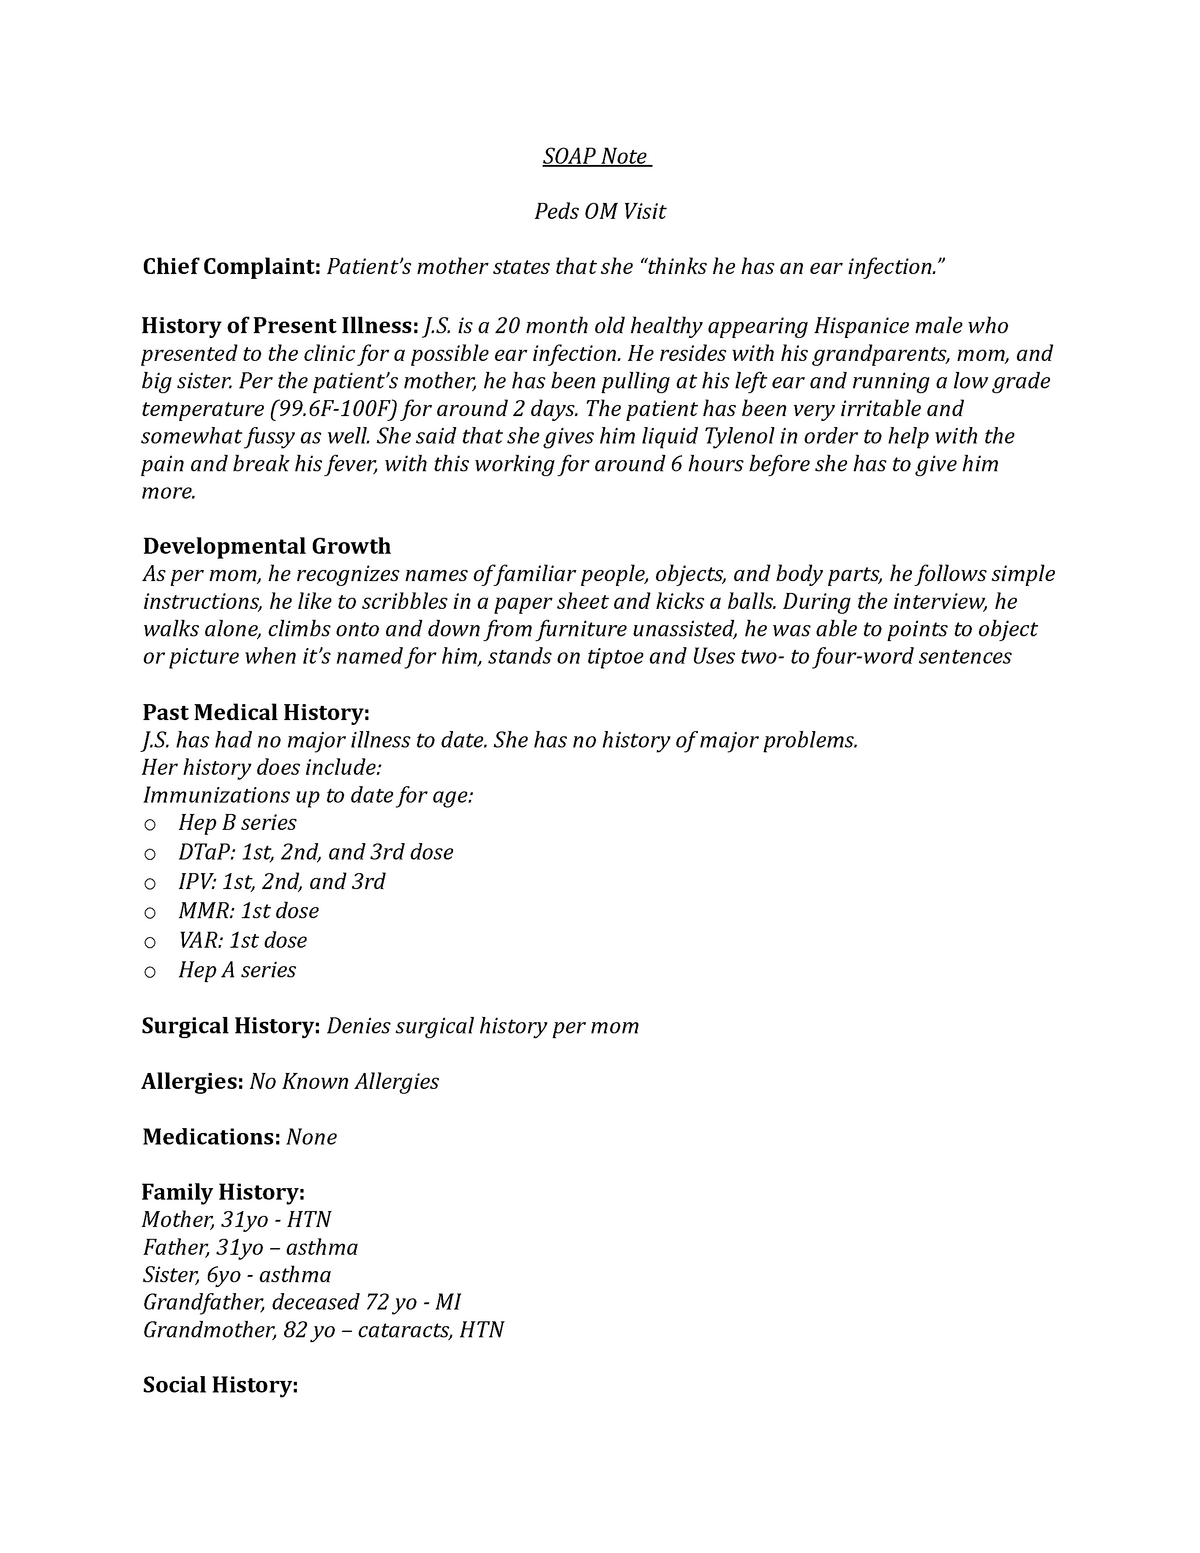 Peds OM - soap note - SOAP Note Peds OM Visit Chief Complaint With Regard To Pediatric Soap Note Template